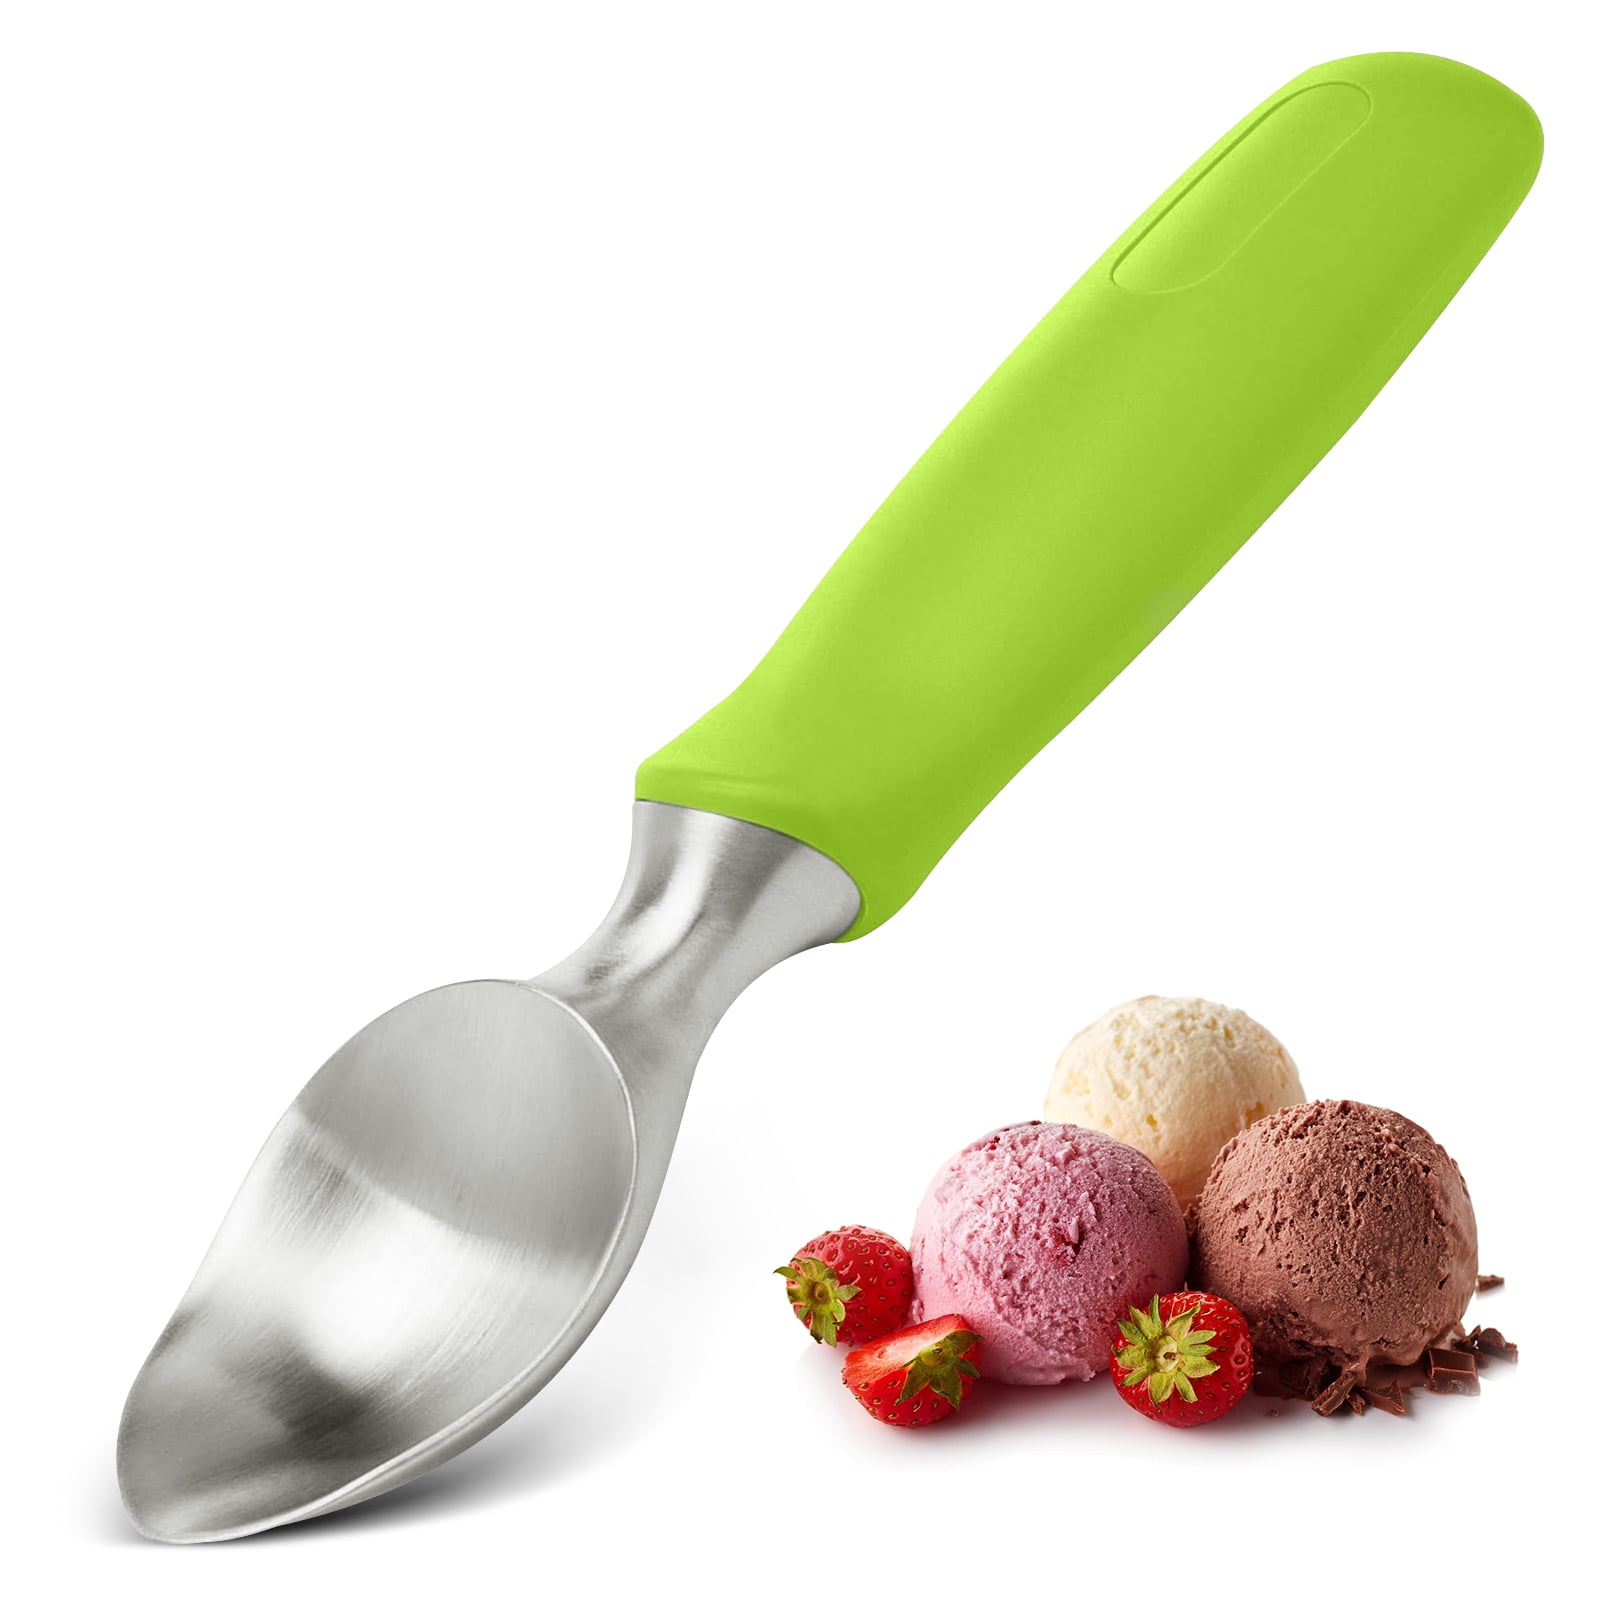 JahyElec Ice Cream Scoop Stainless Steel Cylindrical Ice Cream Scoop with  Spring-powered Trigger Release Big Volume Scoop Old Fashion Style scoop